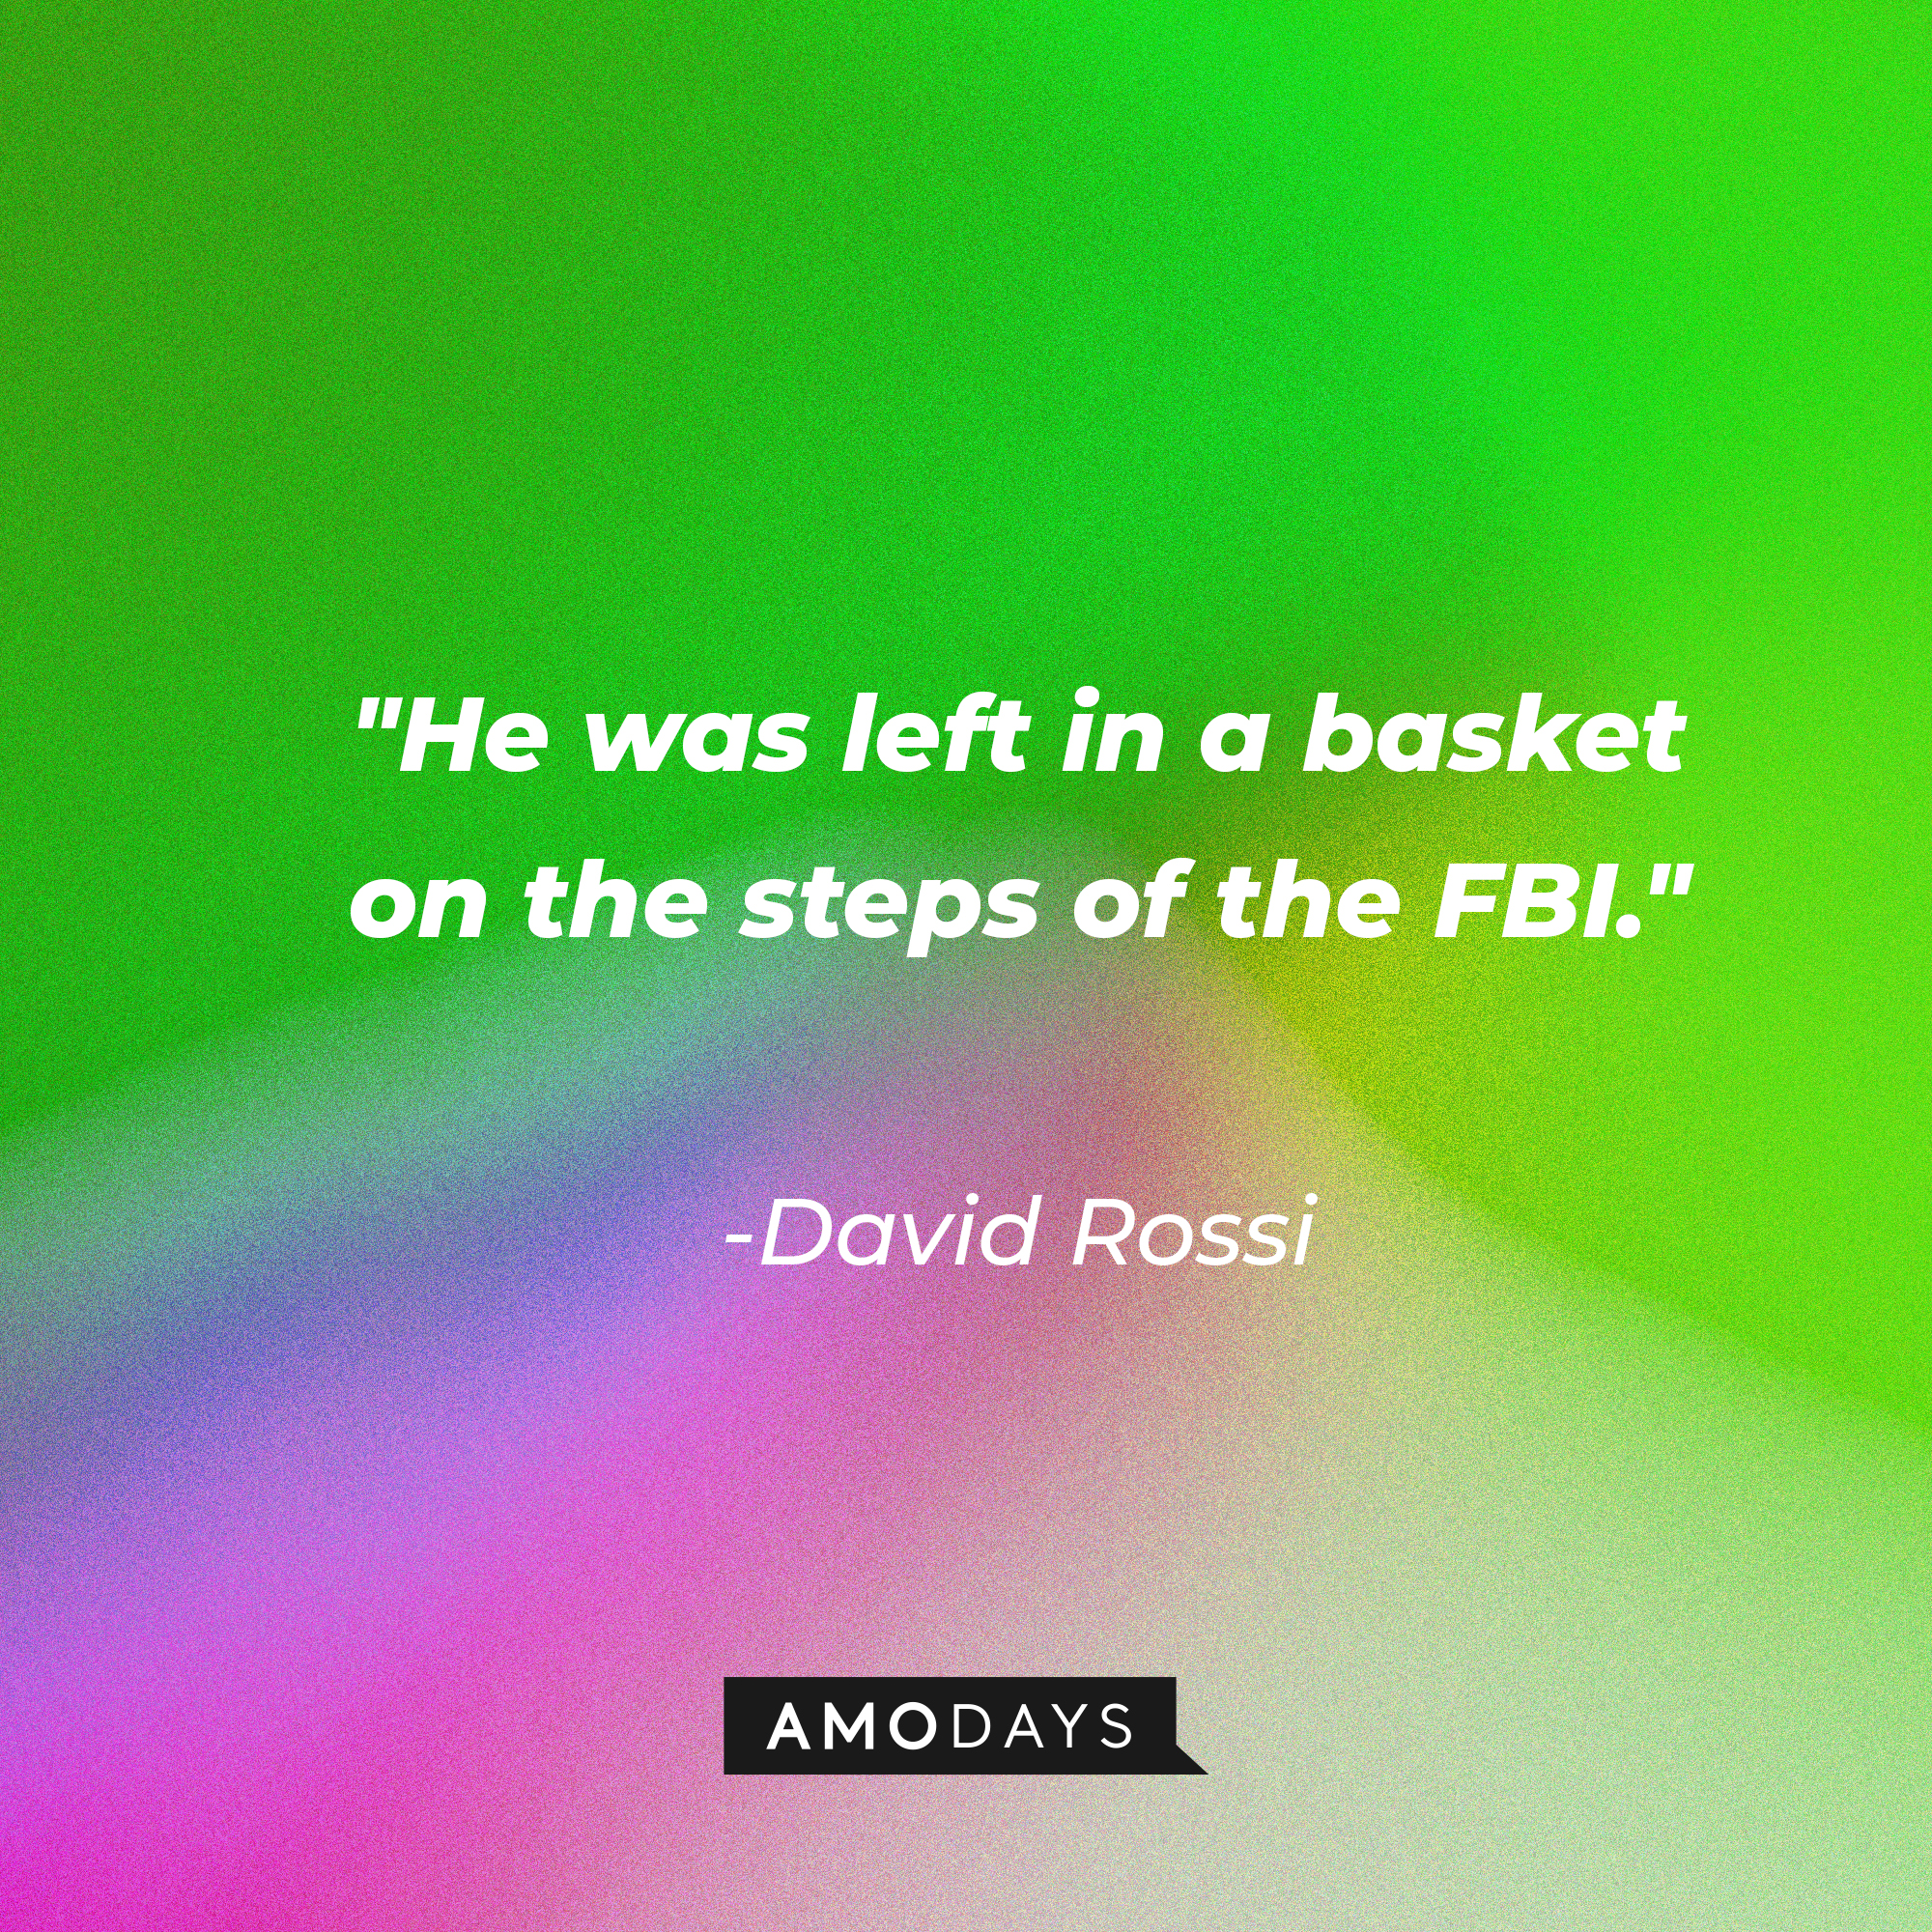 David Rossi's quote: "He was left in a basket on the steps of the FBI." | Source: AmoDays